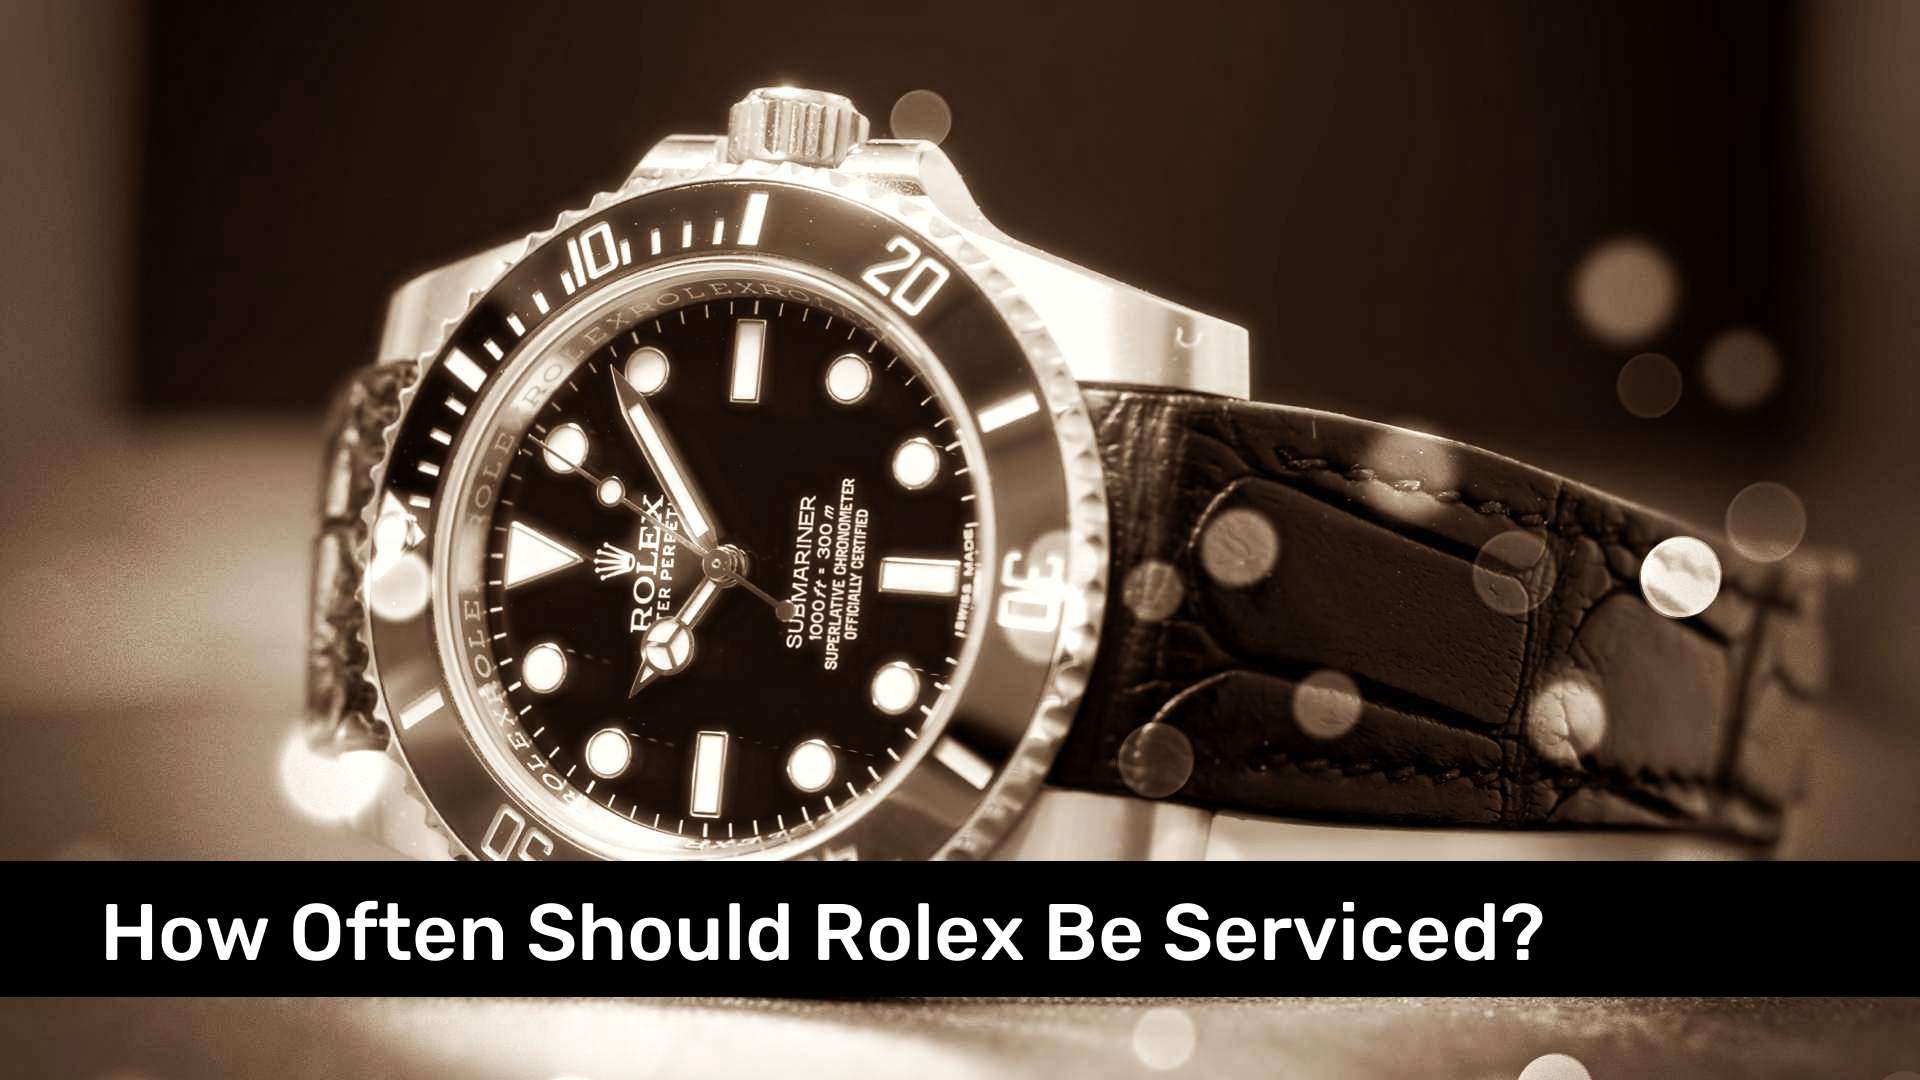 How Often Should Rolex Be Serviced?